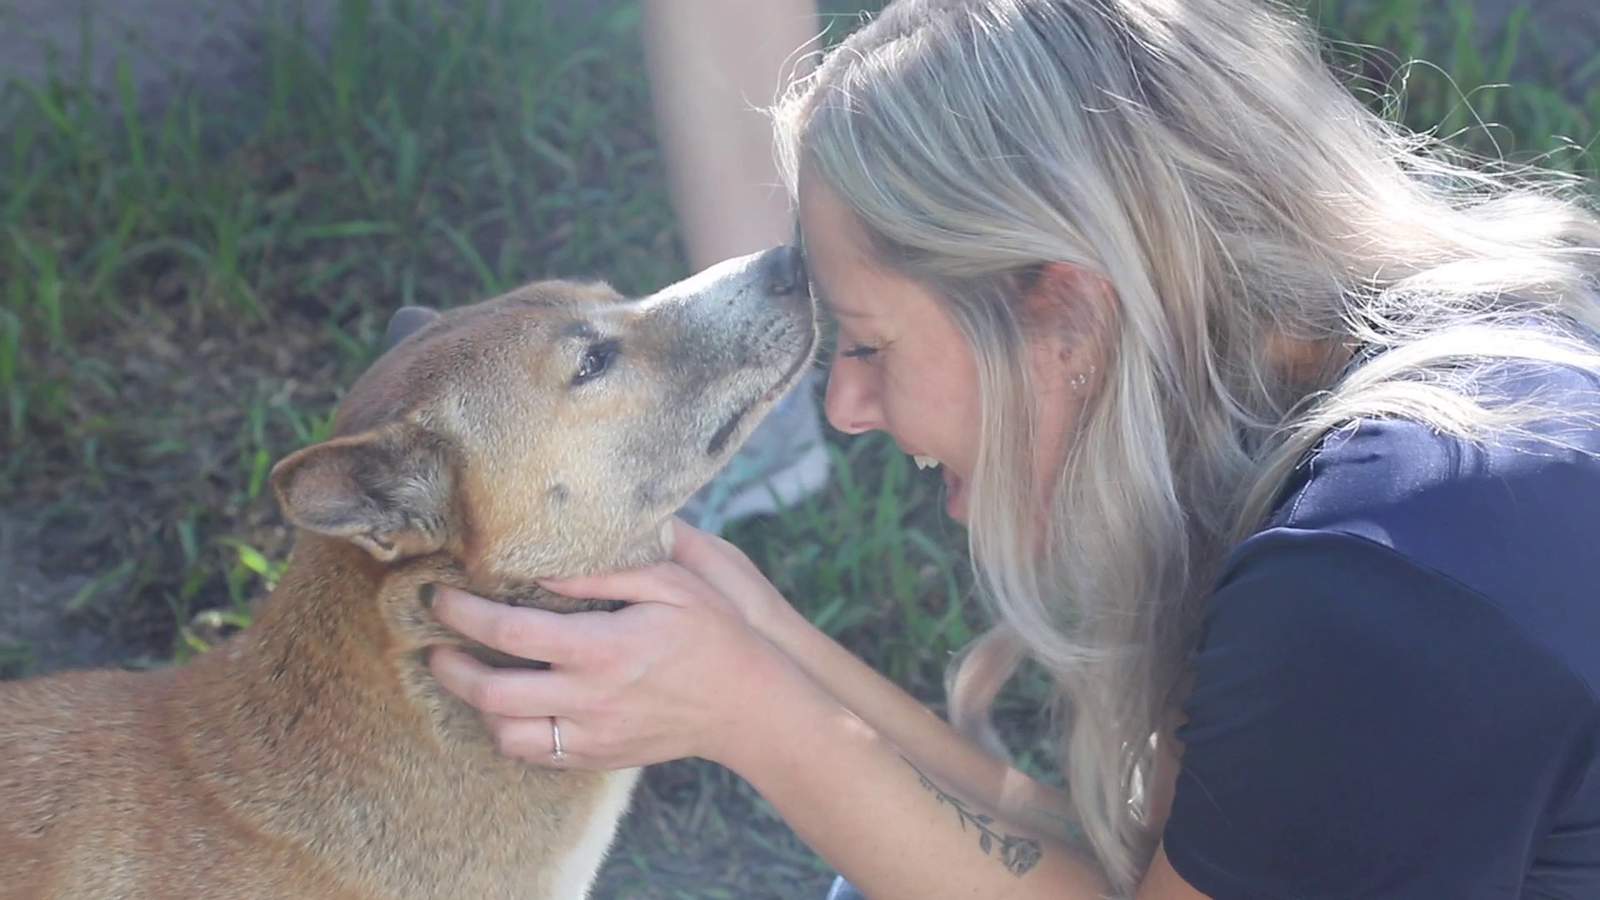 A pack of exotic animals finds safety in Southwest Florida sanctuary